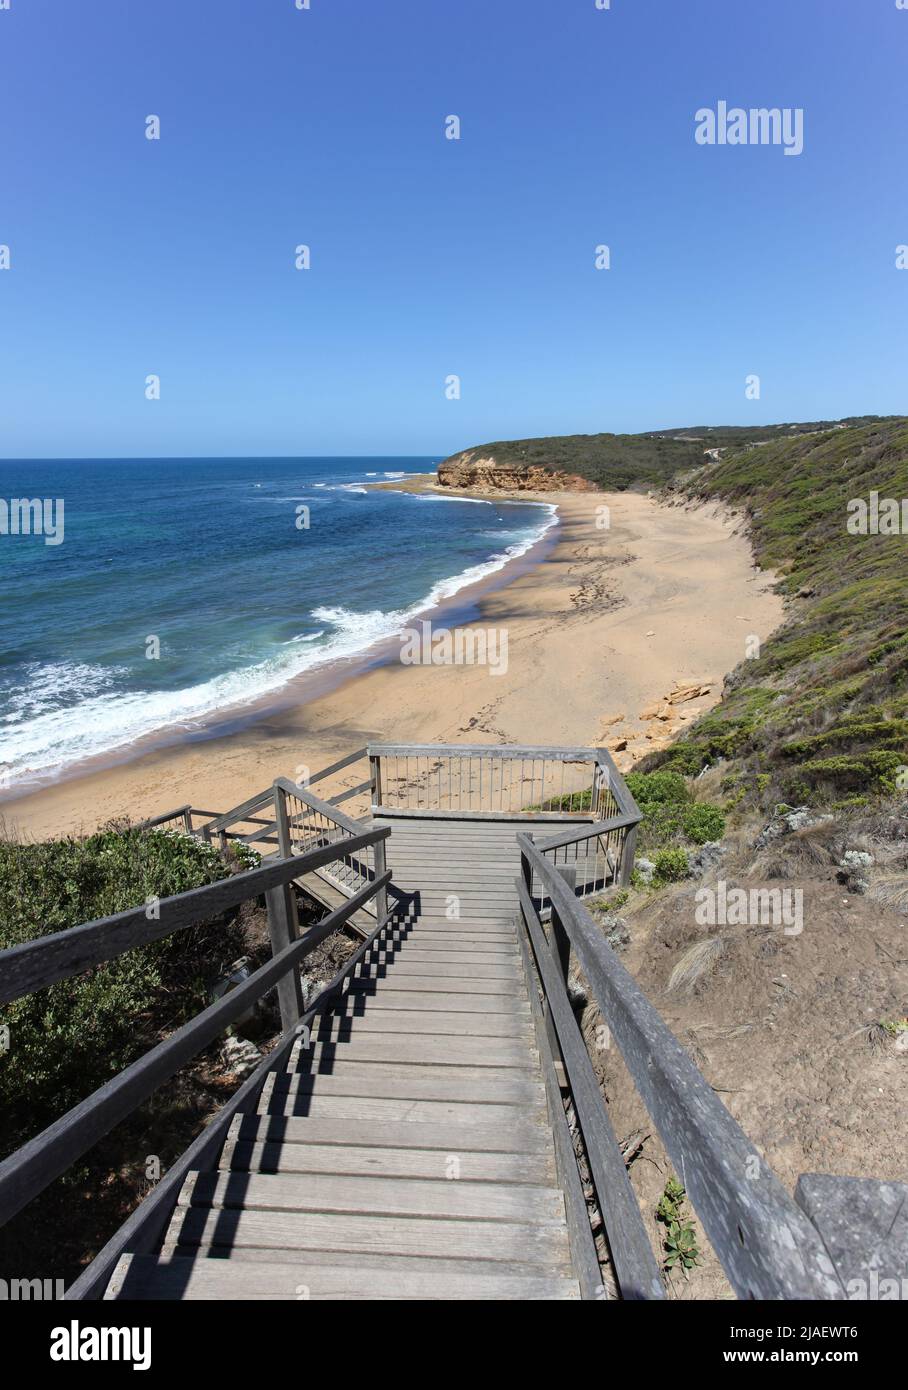 Bells Beach is one of Australia's most famous surfing beaches located on the Great Ocean Road west of Melbourne.This stairway leads down to the sand. Stock Photo